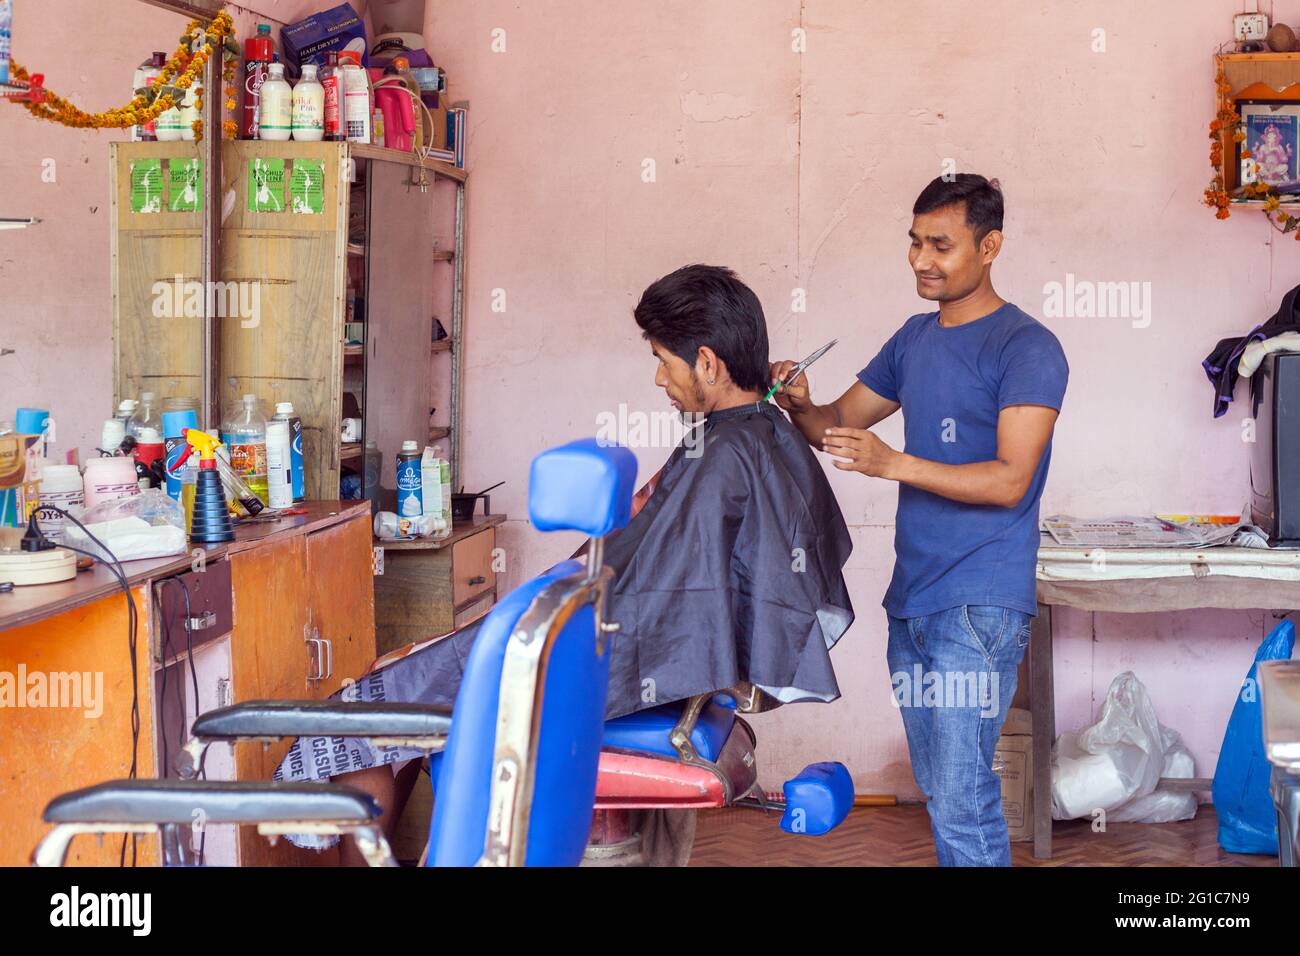 Indian male with bouffant hairstyle having his hair cut in salon, Agonda,  Goa, India Stock Photo - Alamy